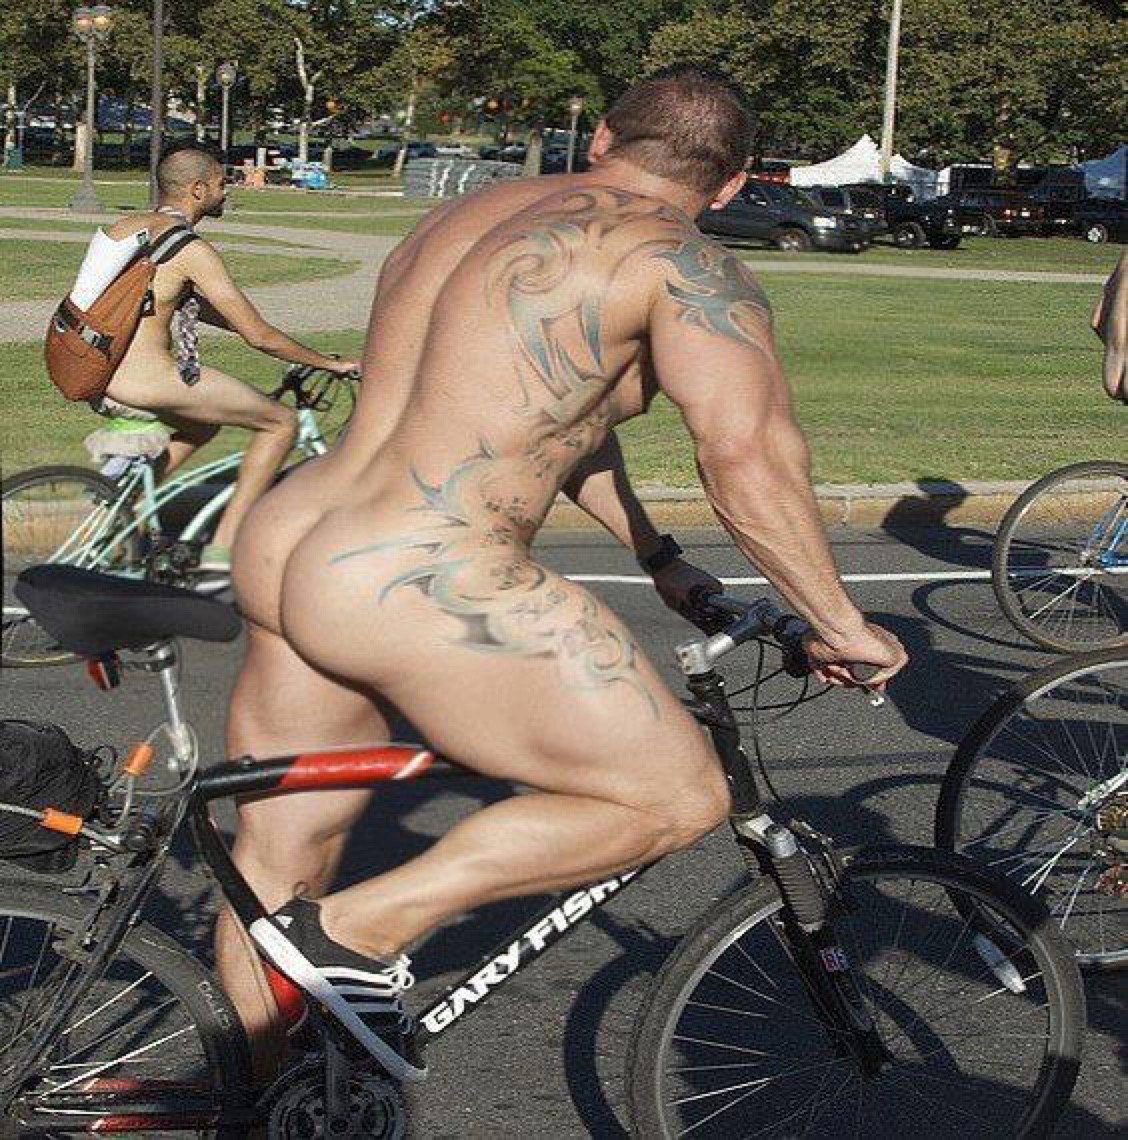 Photo by Wanaliklatin with the username @Wanaliklatin,  October 12, 2019 at 11:34 PM. The post is about the topic Men's ass on motorcycle/bicycle seats